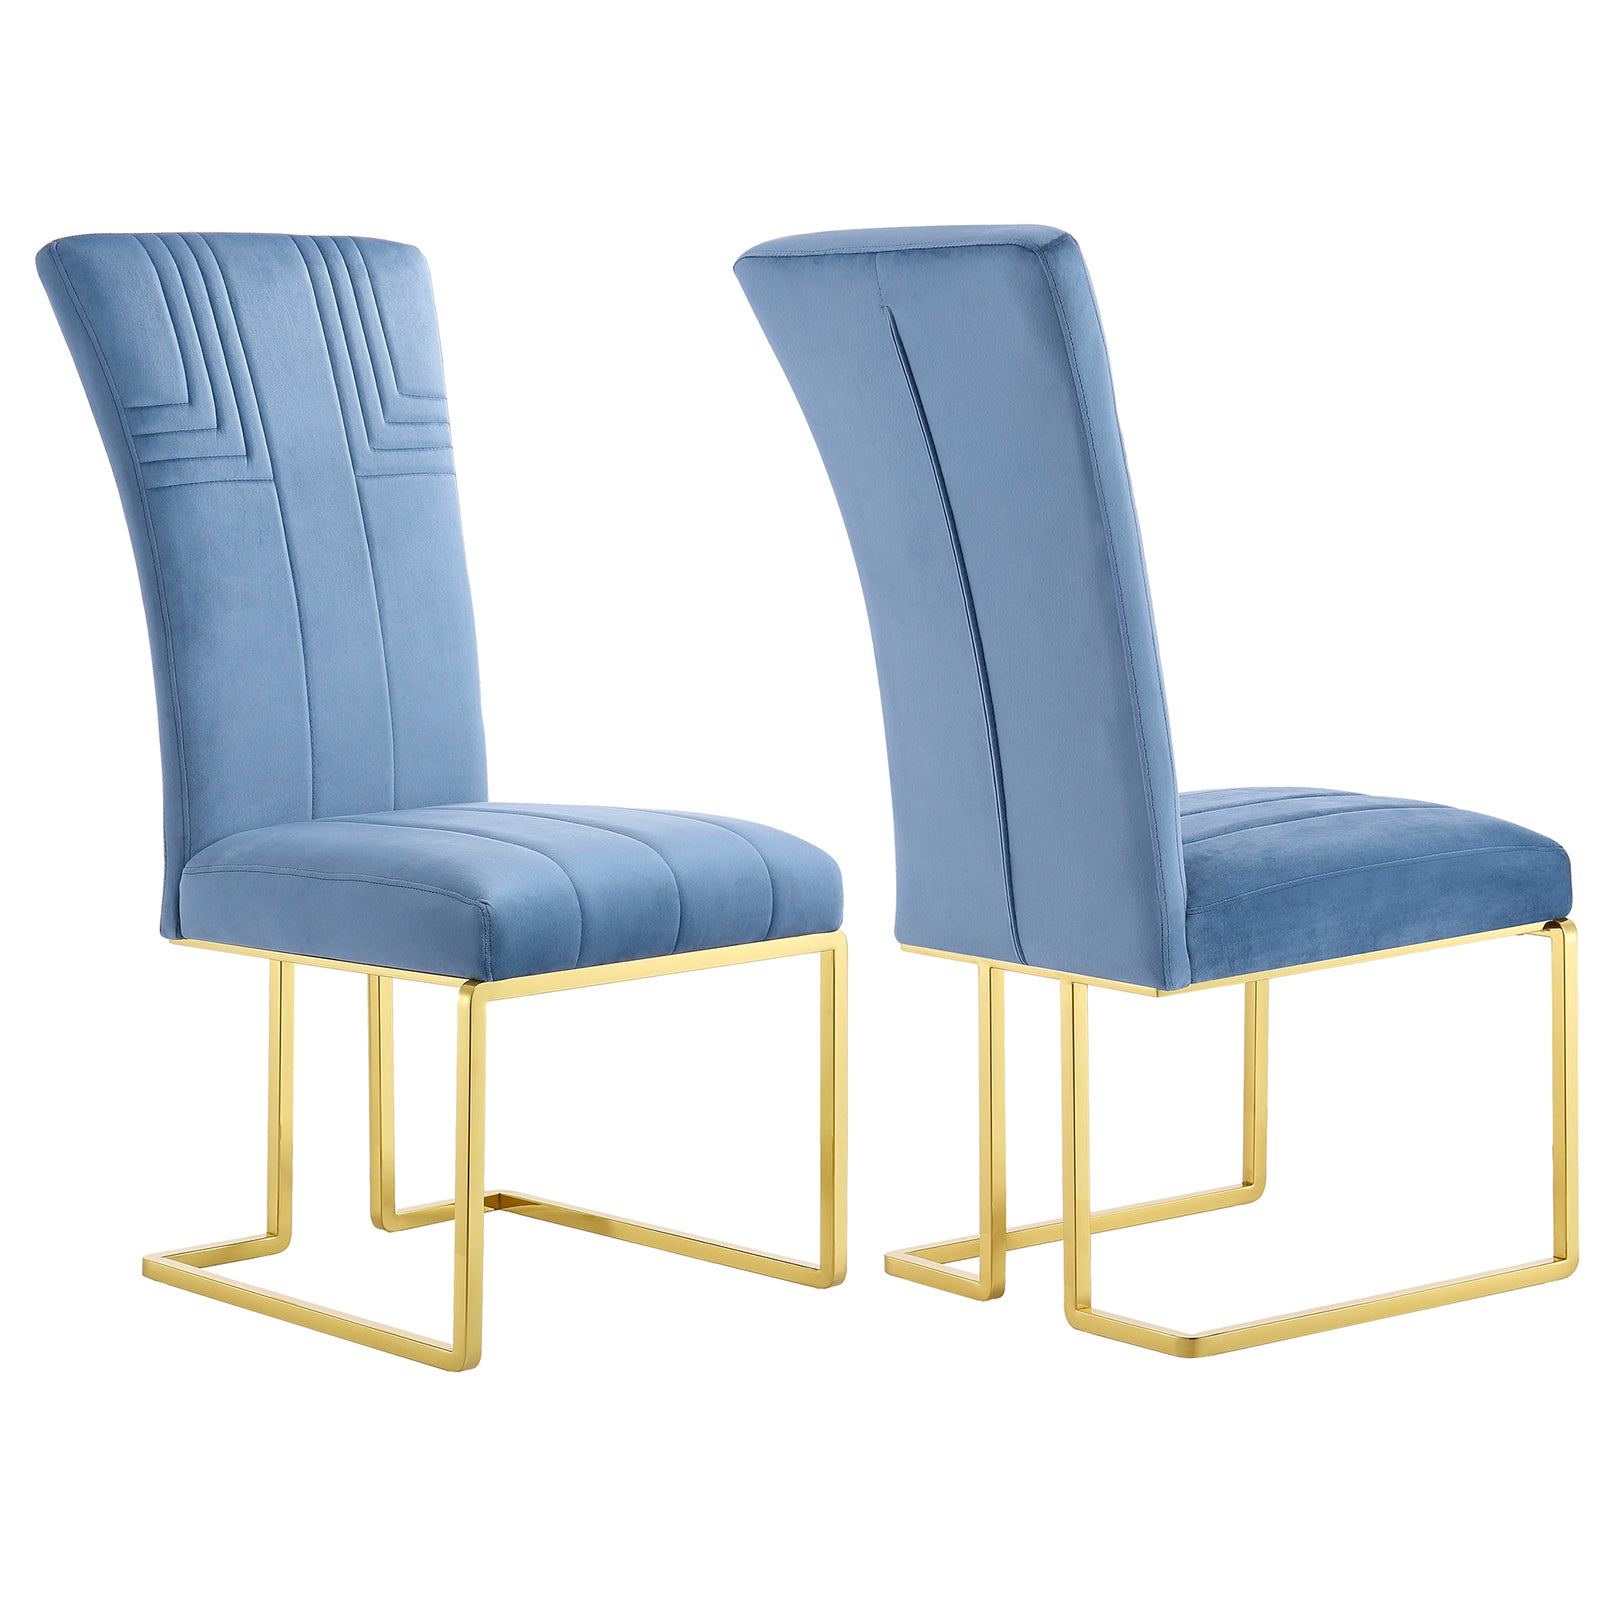 Discover the Exquisite Features of AUZ Sled Base Dining Chairs and Sky Blue Velvet Upholstery